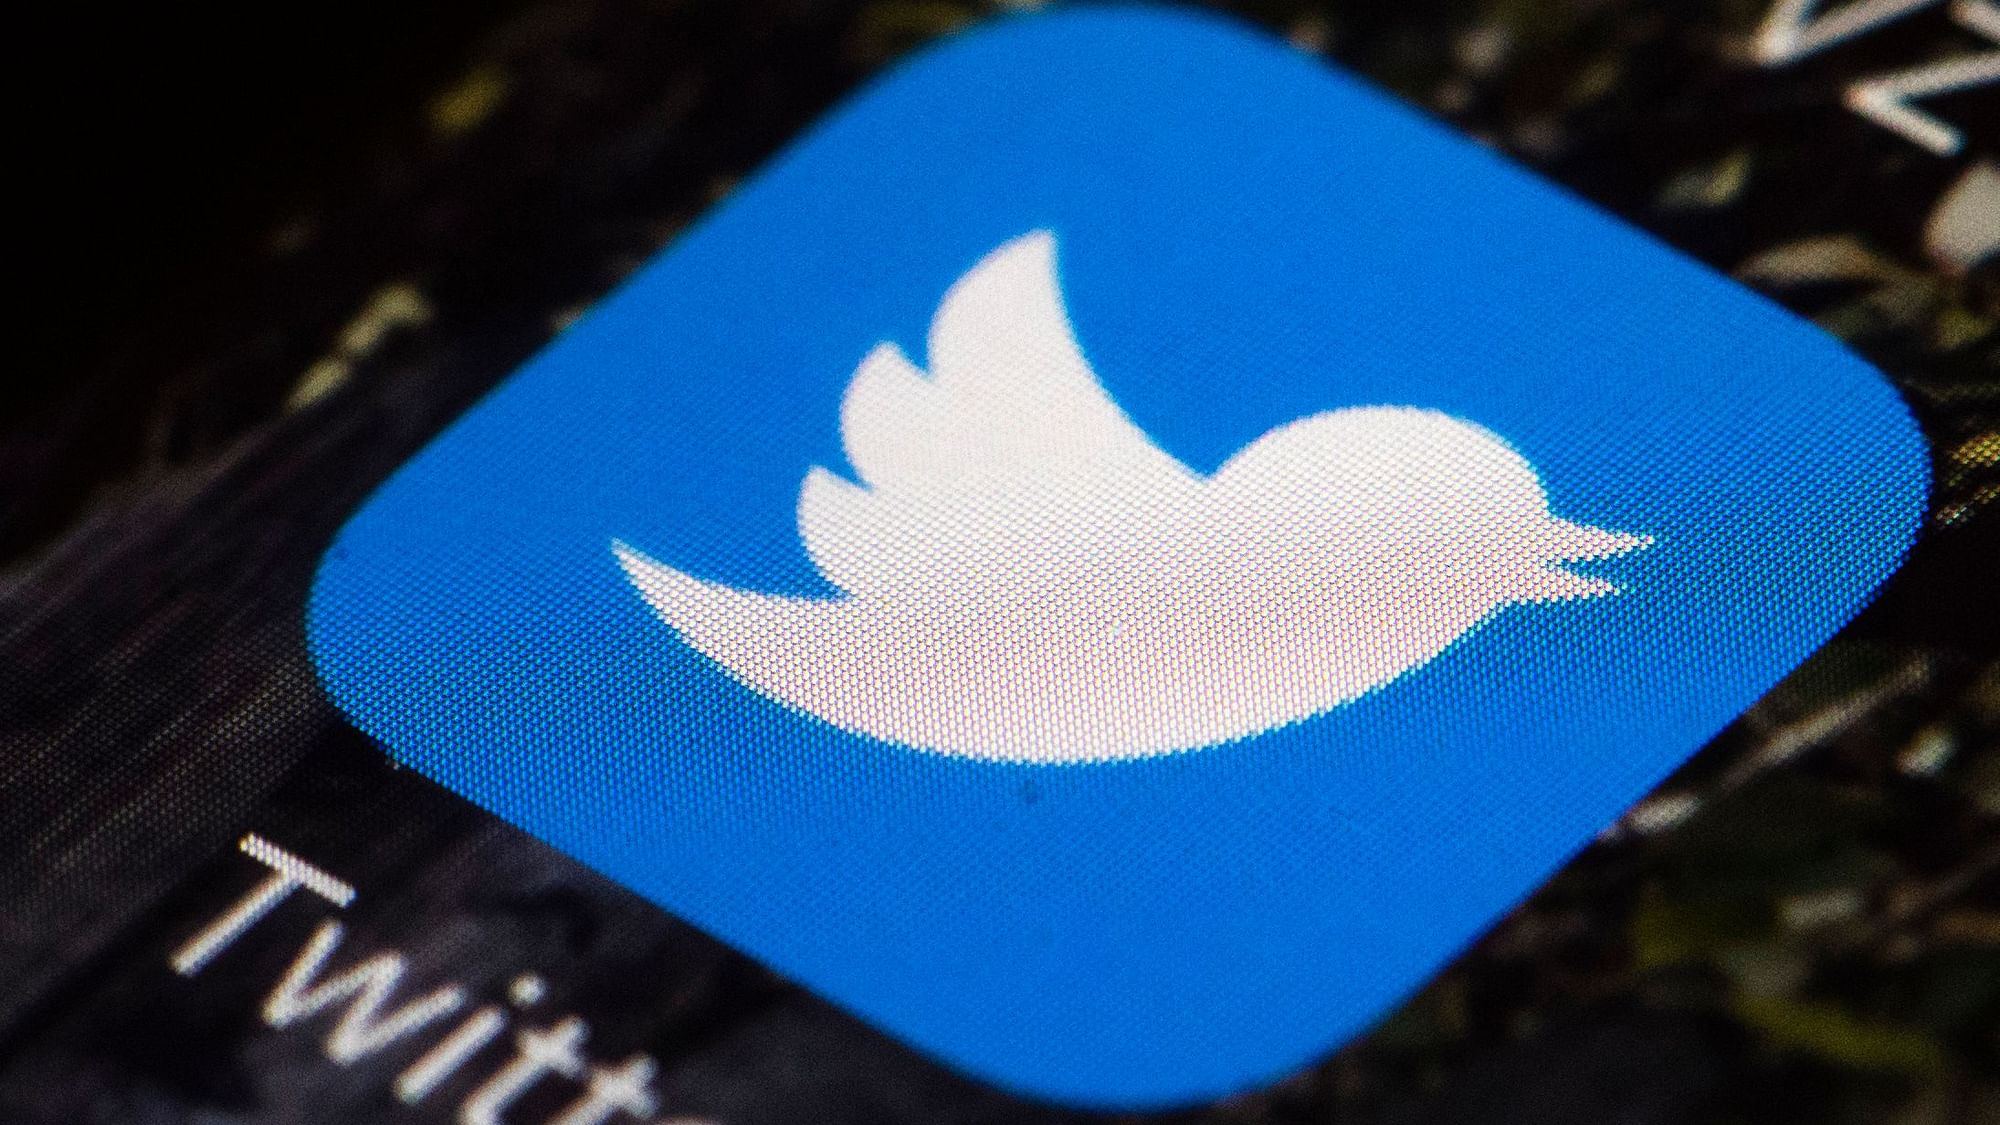 Twitter said in a blog post that it “inadvertently” used the emails and phone numbers to let advertisers match people to their own marketing lists.